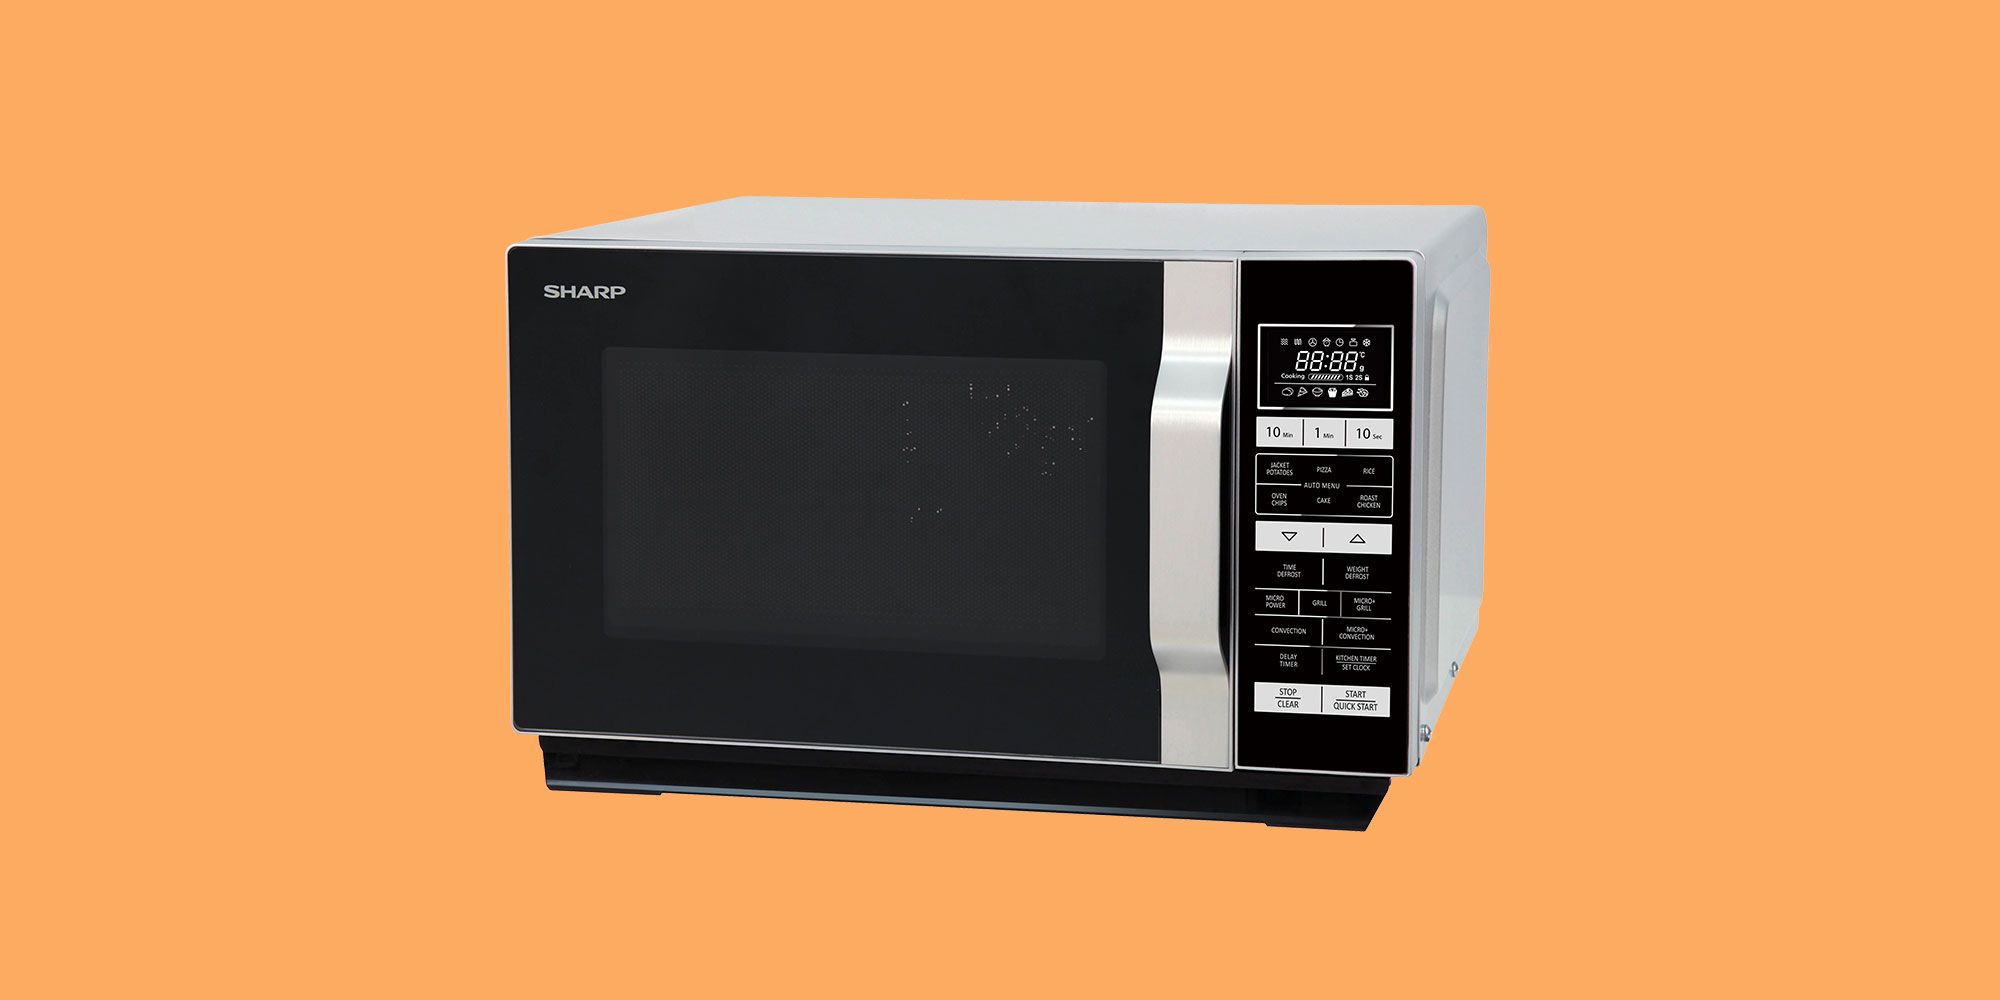 How to buy a microwave: Best solo and combination microwaves 2023